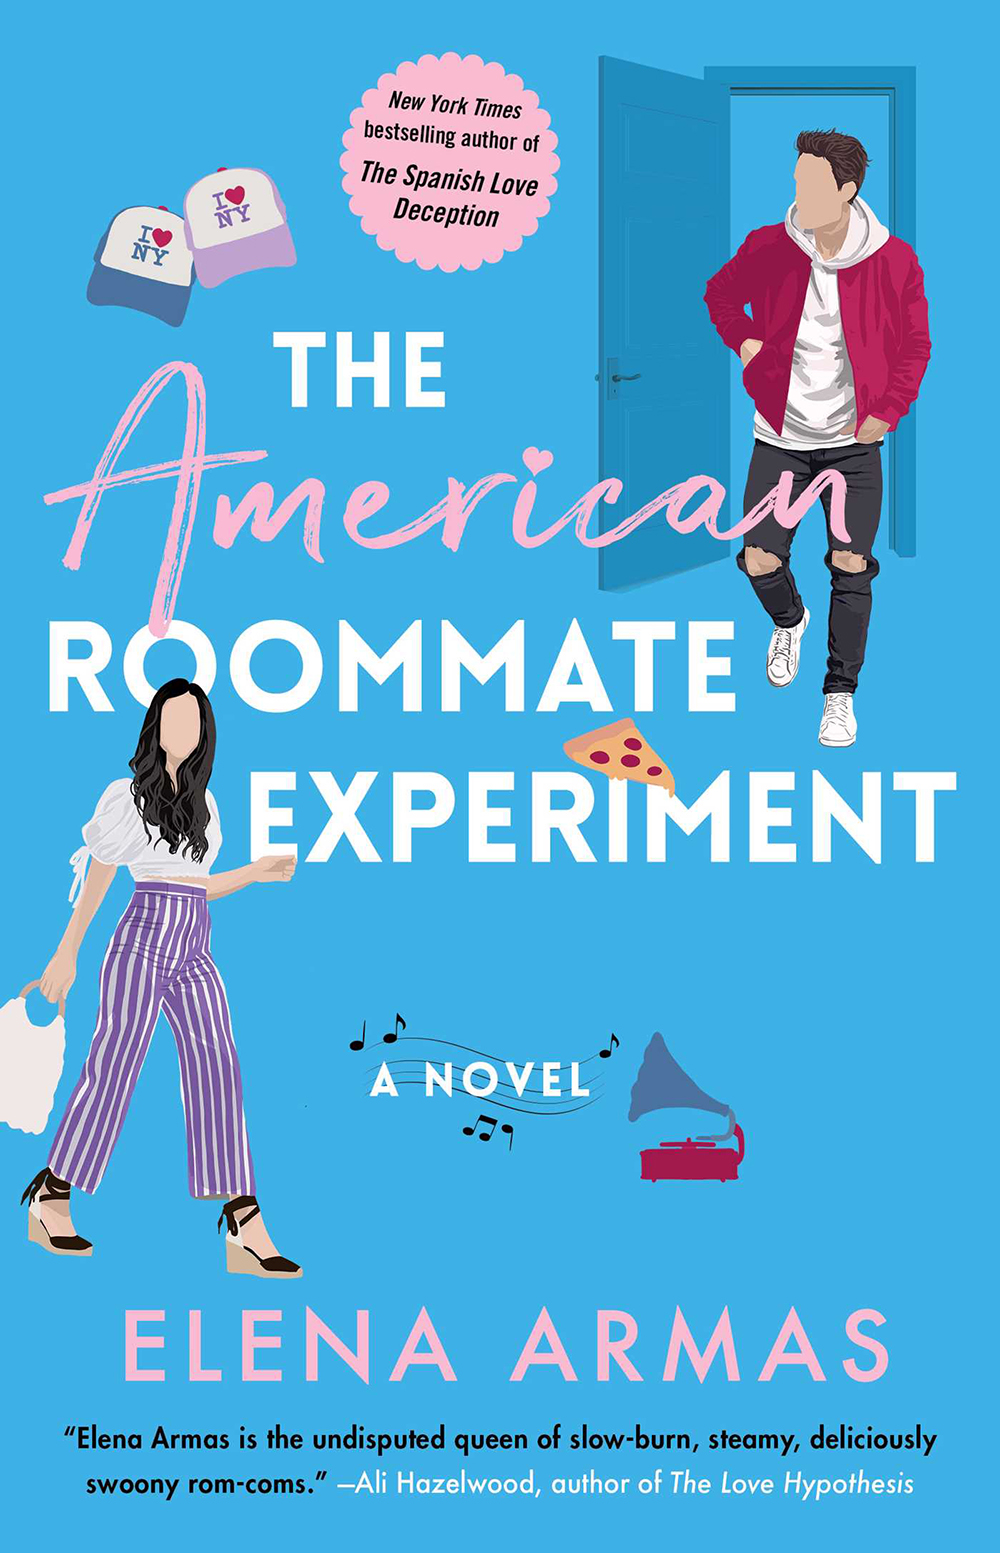 The cover of the romance book The American Roommate Experiment by Elena Armas